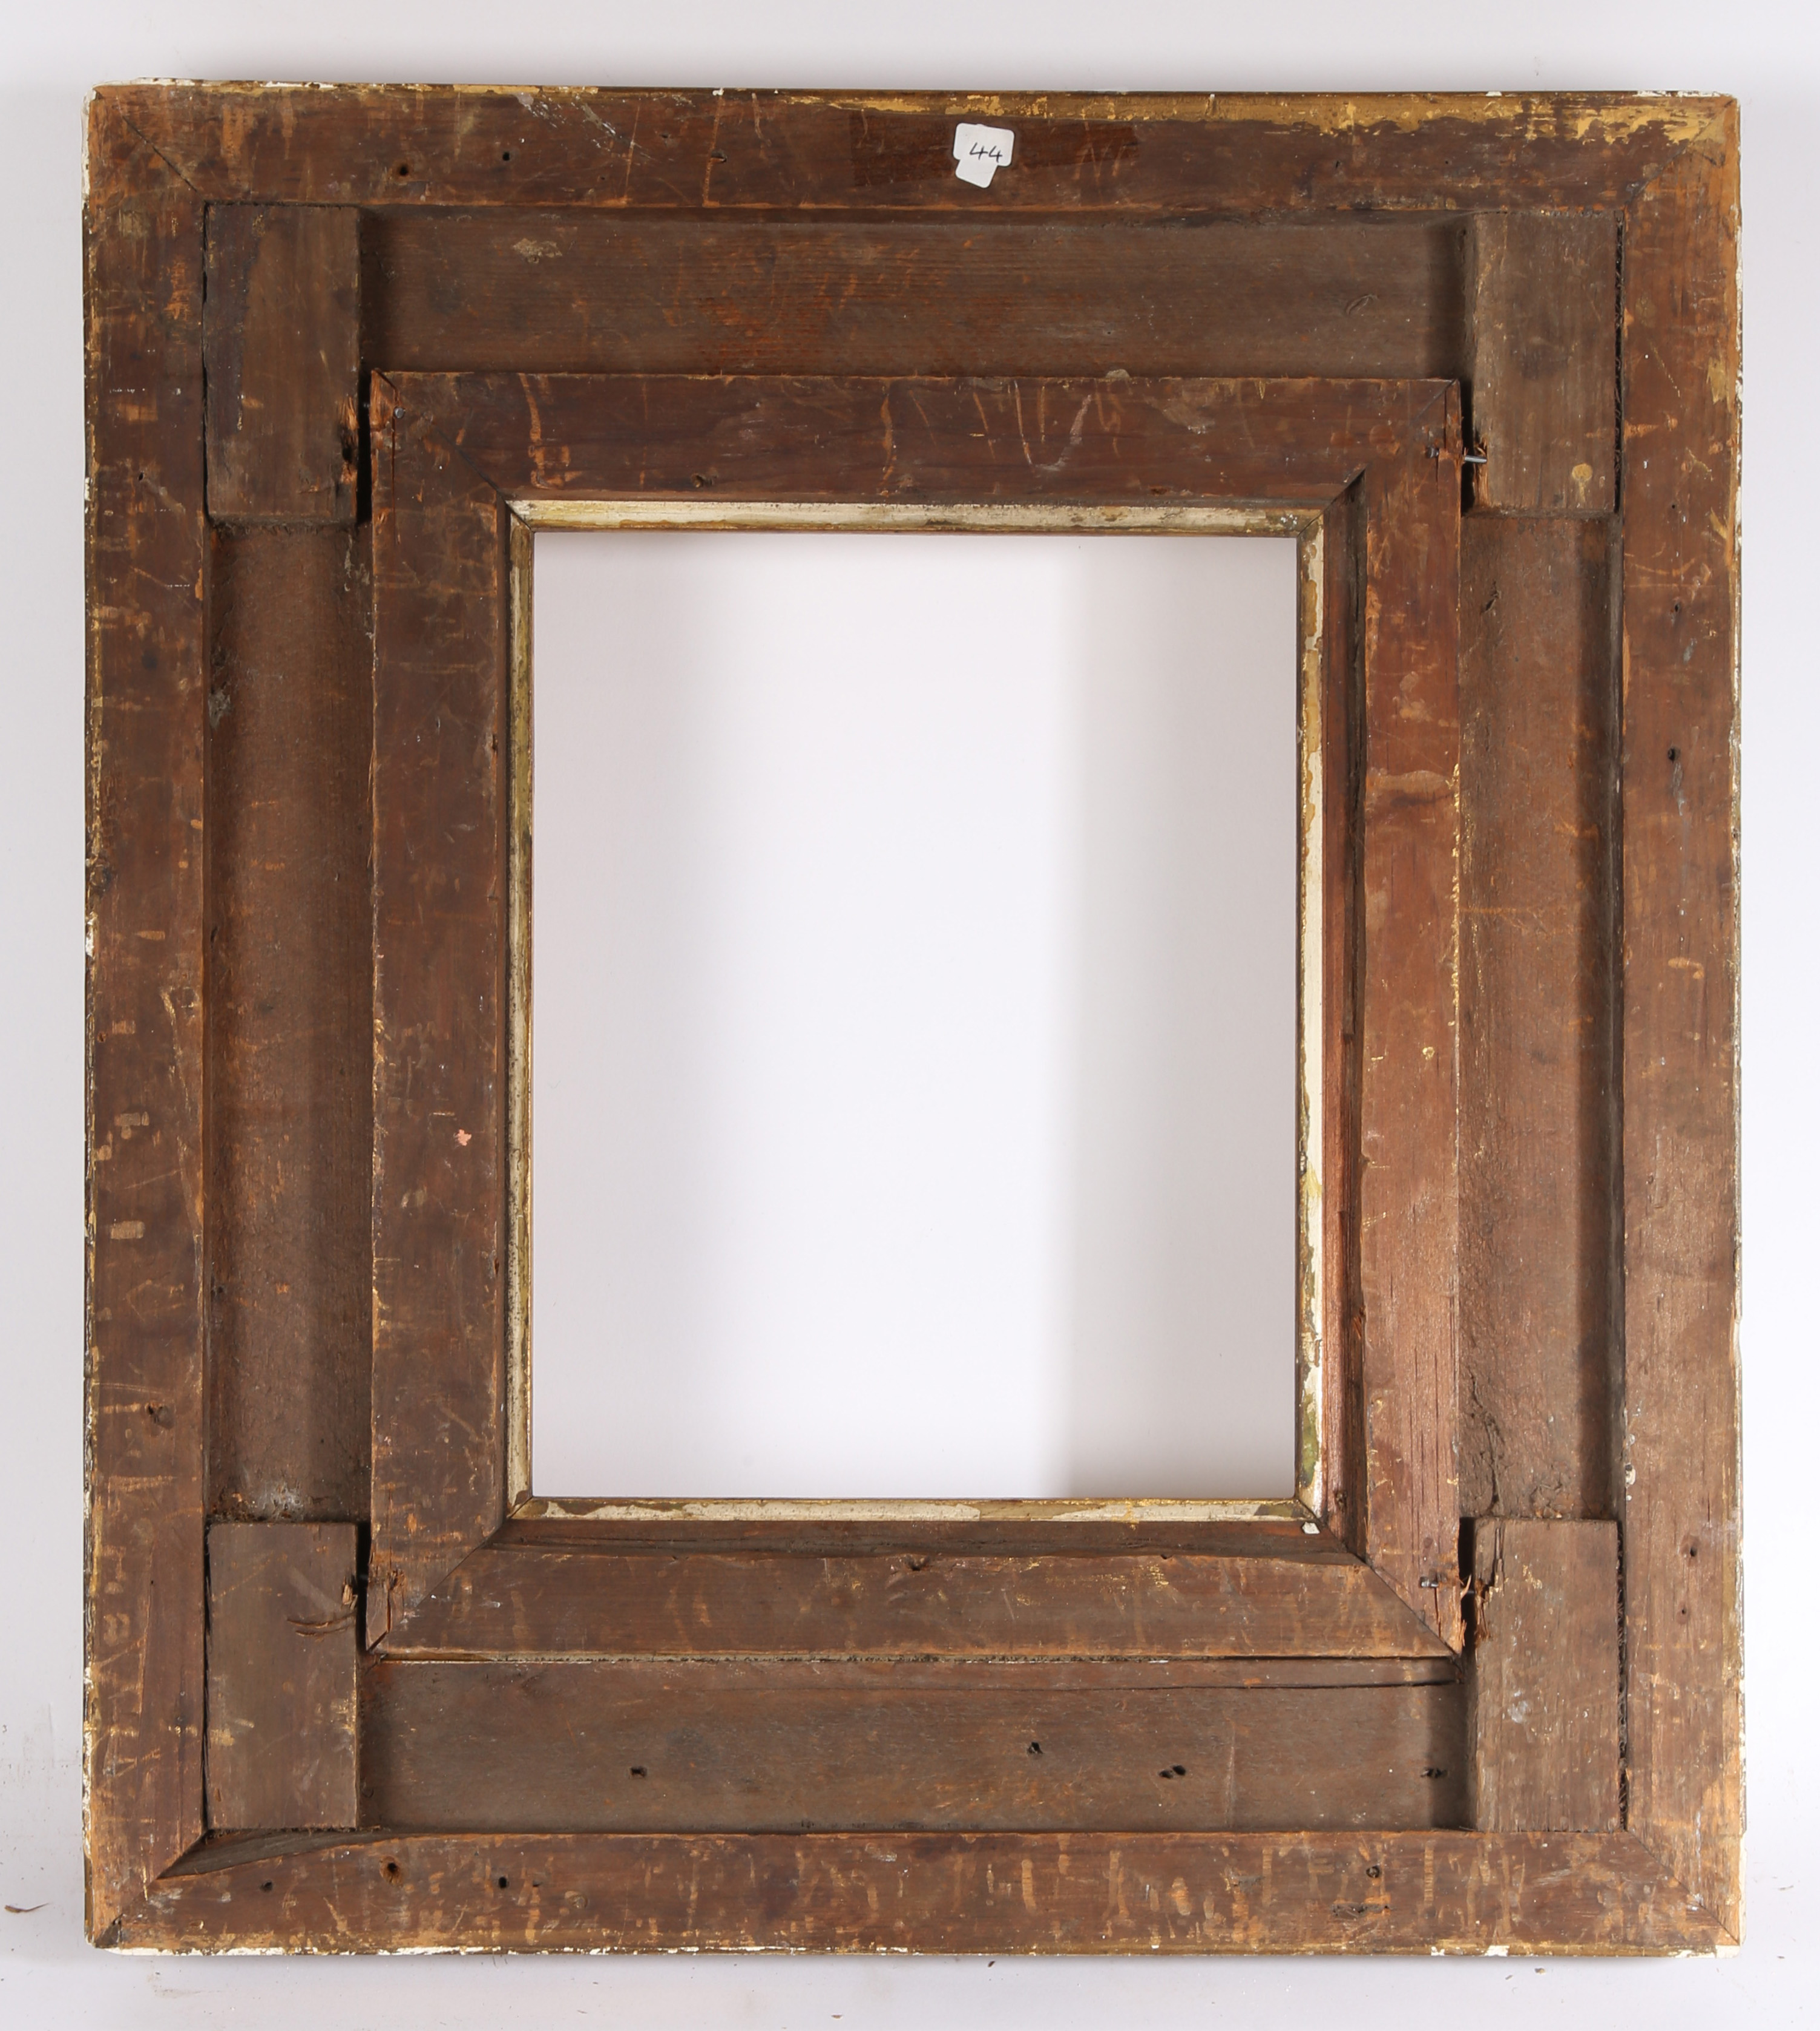 19th century straight picture frame with acanthus leaf corners - rebate size  10in x 8in - Image 8 of 9